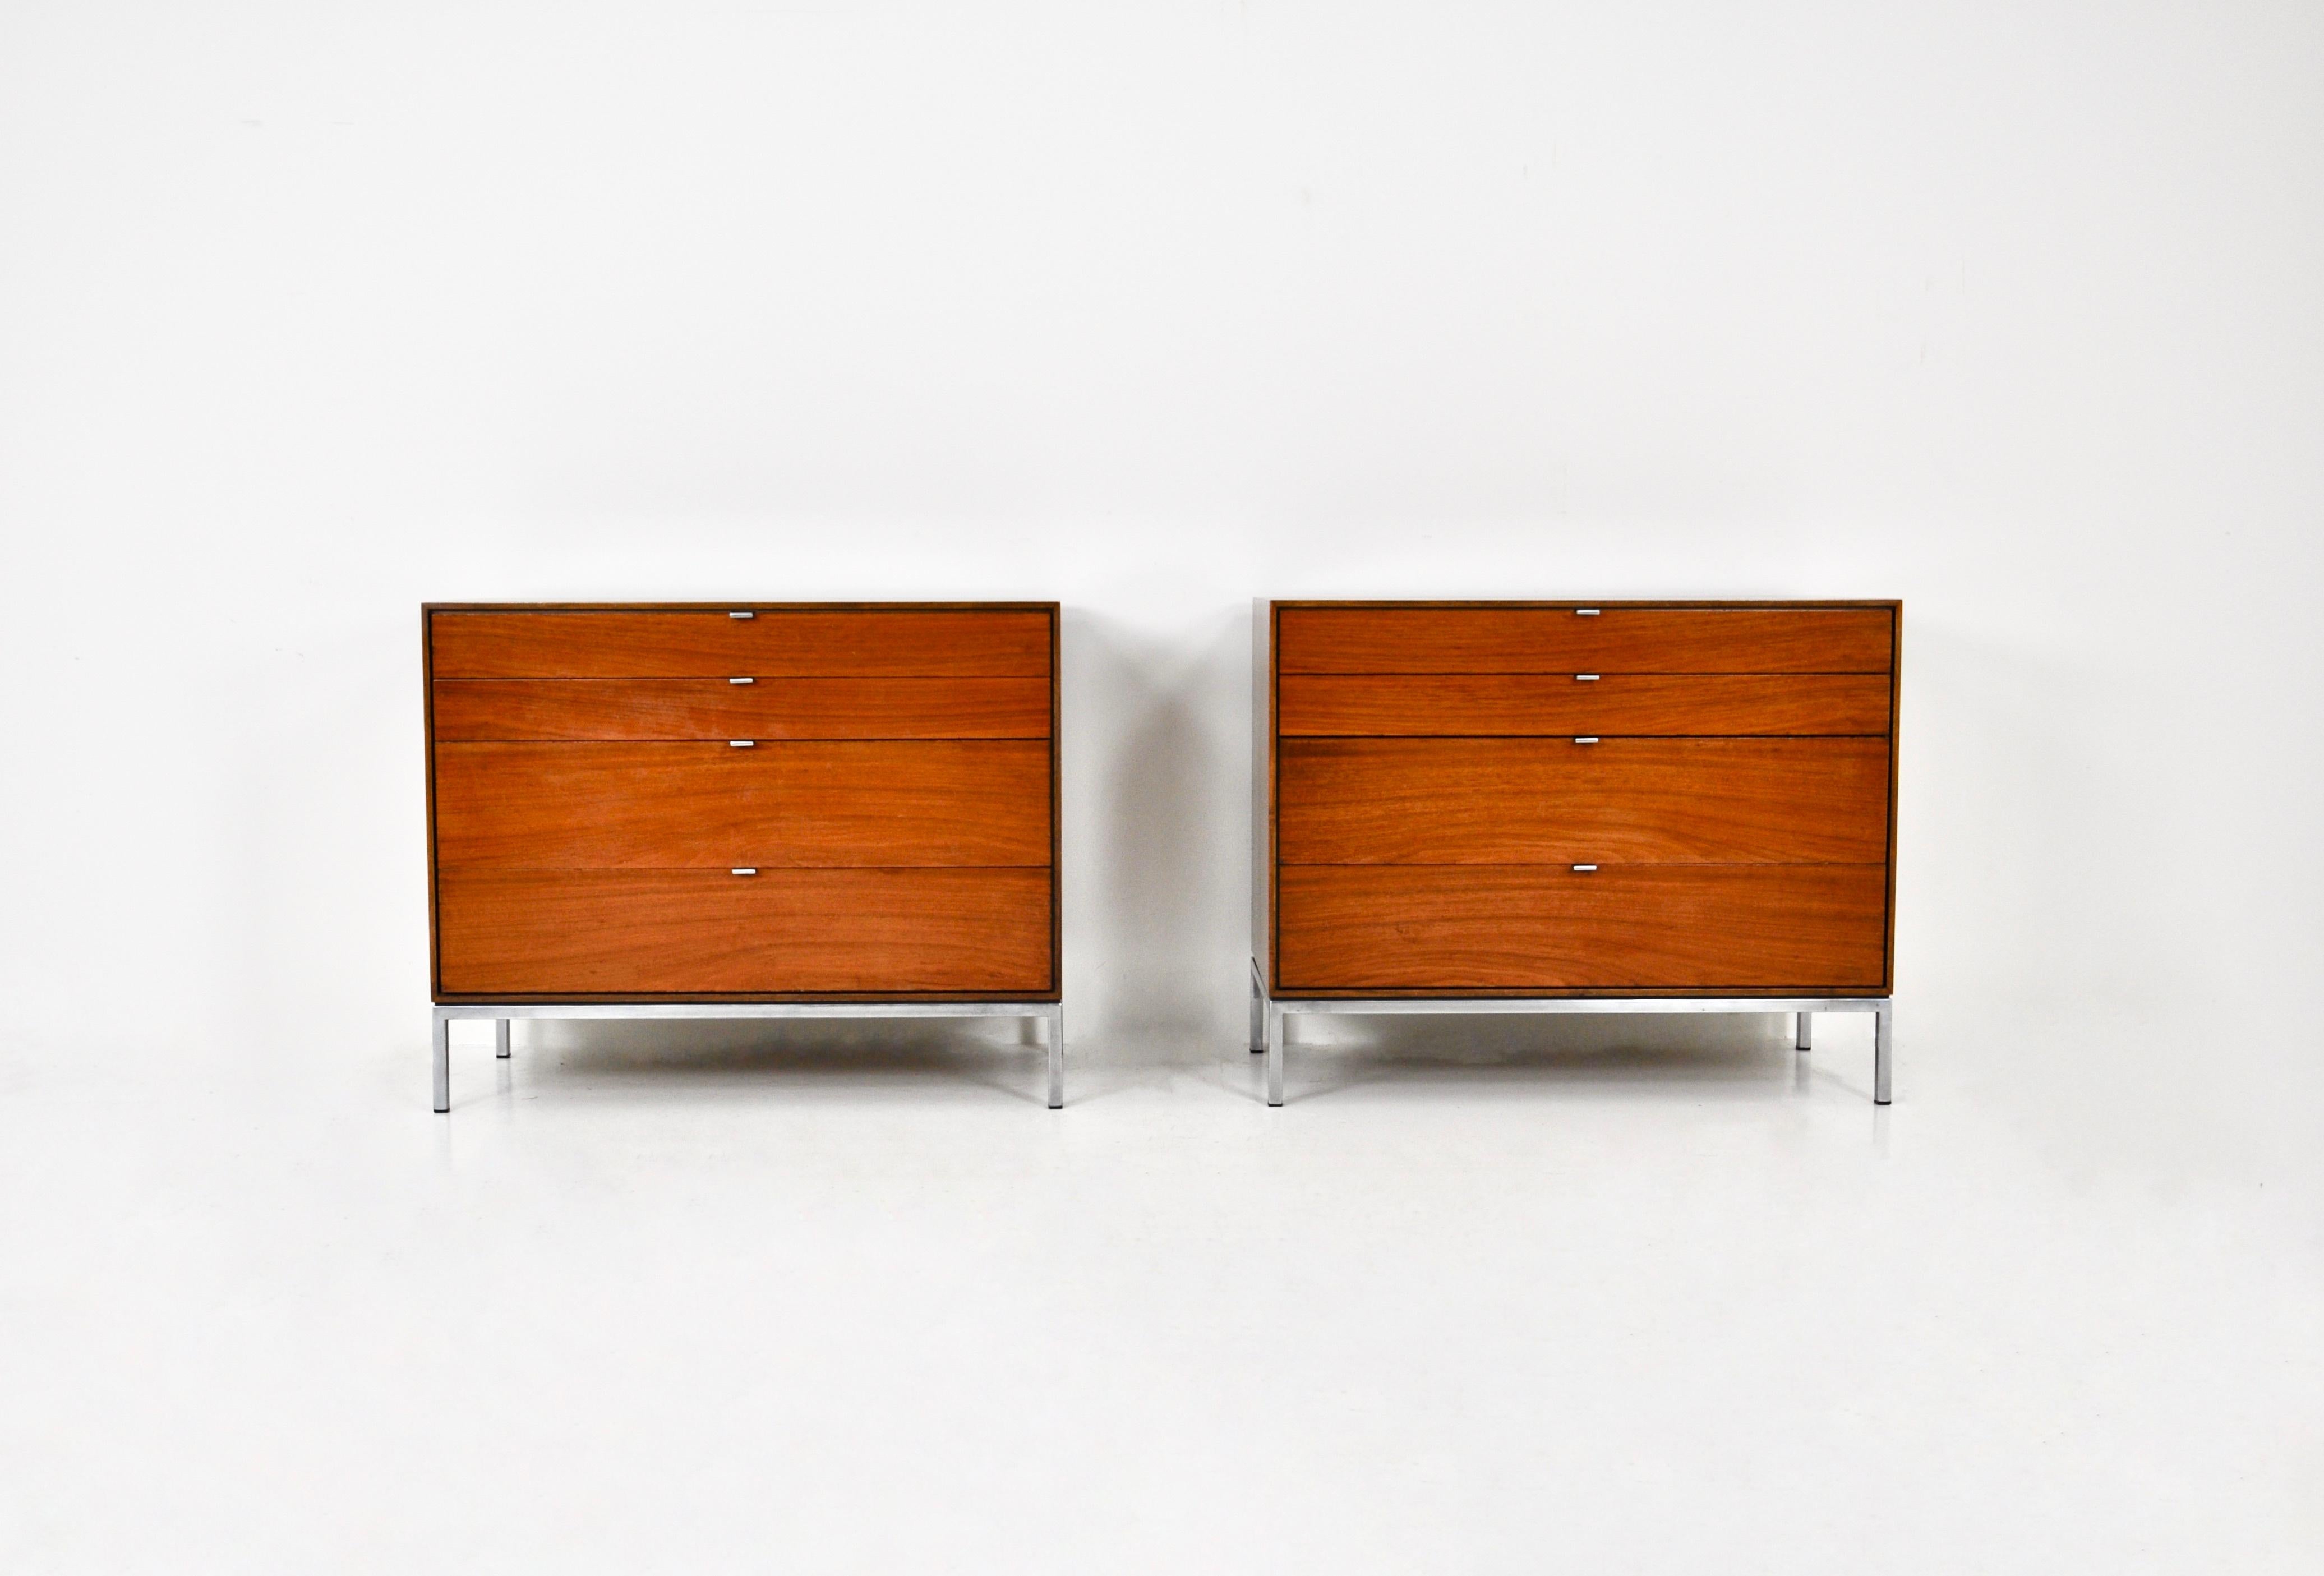 Set of 2 wooden sideboards with metal legs and 4 drawers. Wear due to time and age.